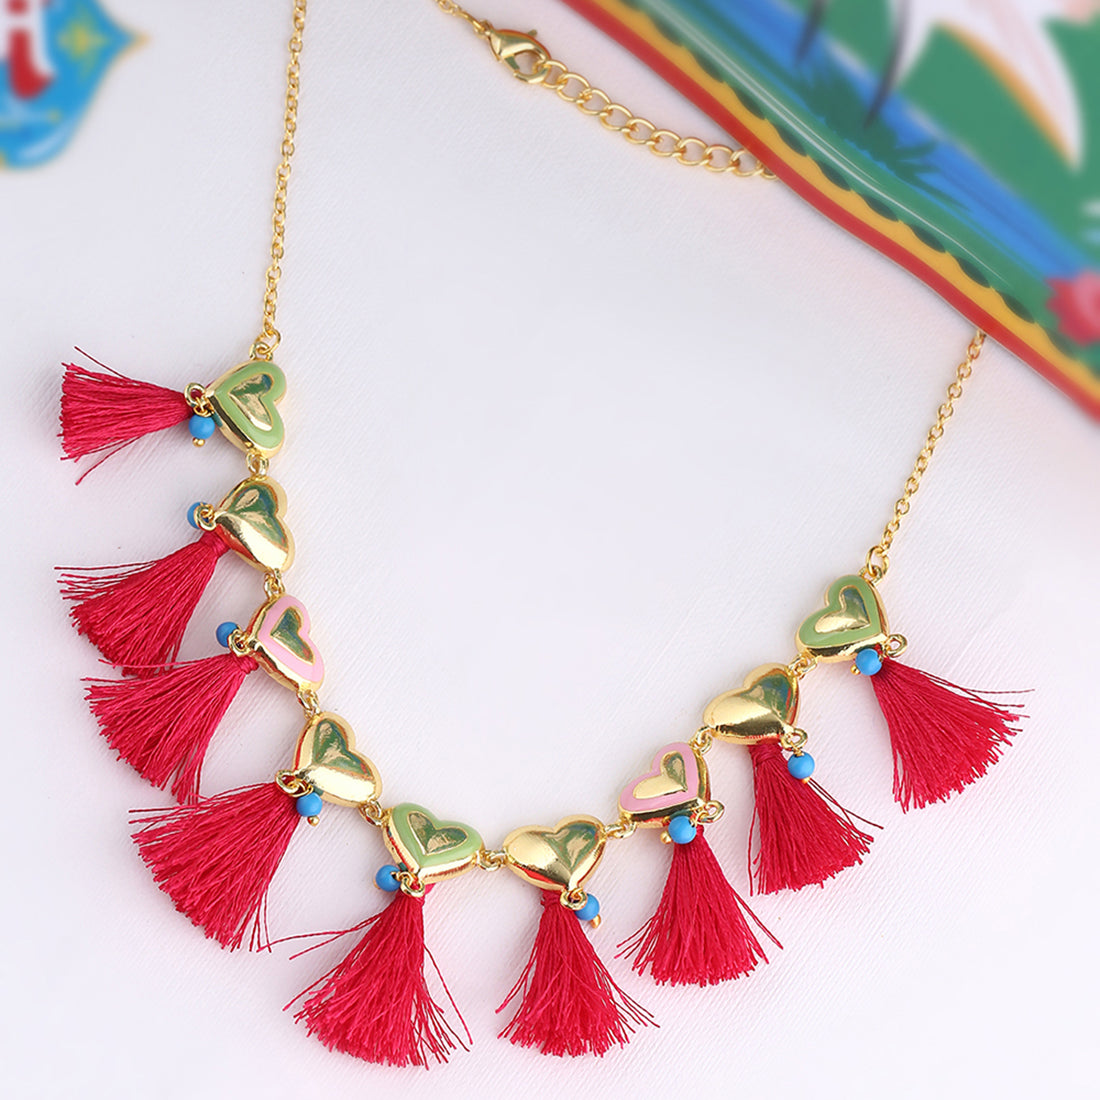 Truck Art Hearts and Tassels Necklace